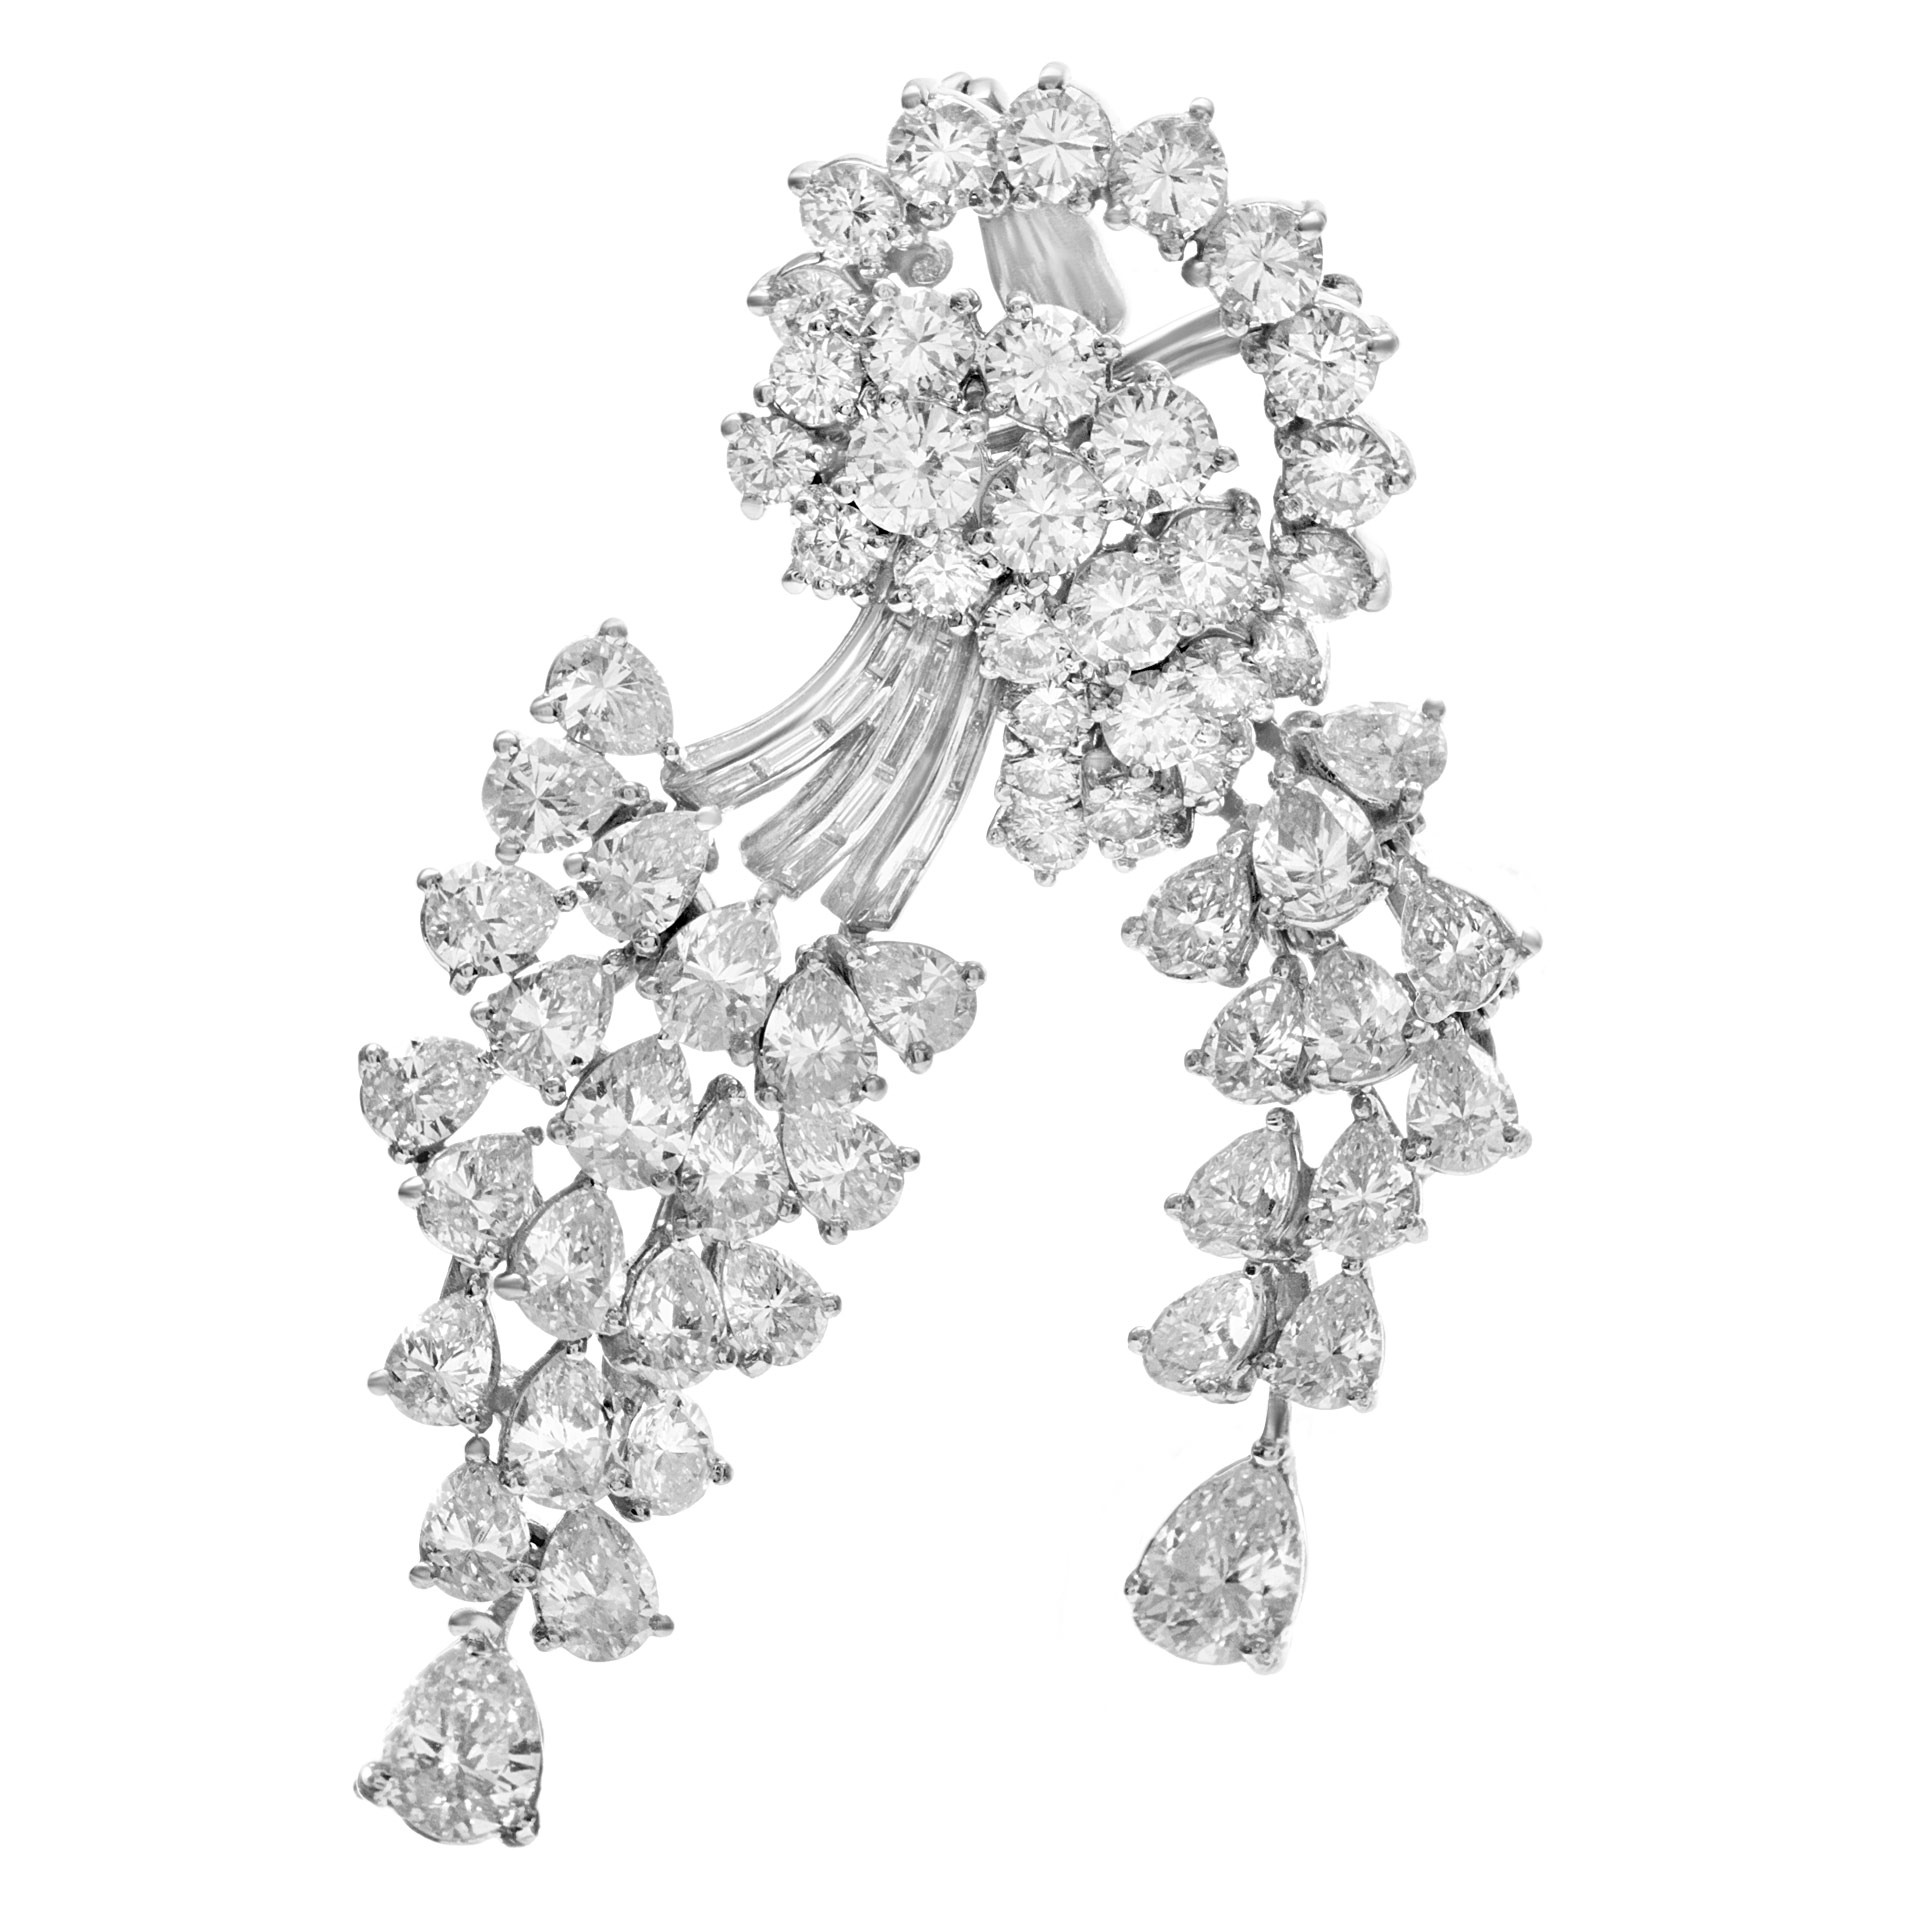 GIA certified Diamond pin with pear, baguett and round shape diamonds w/ a total carat weight of 20.350